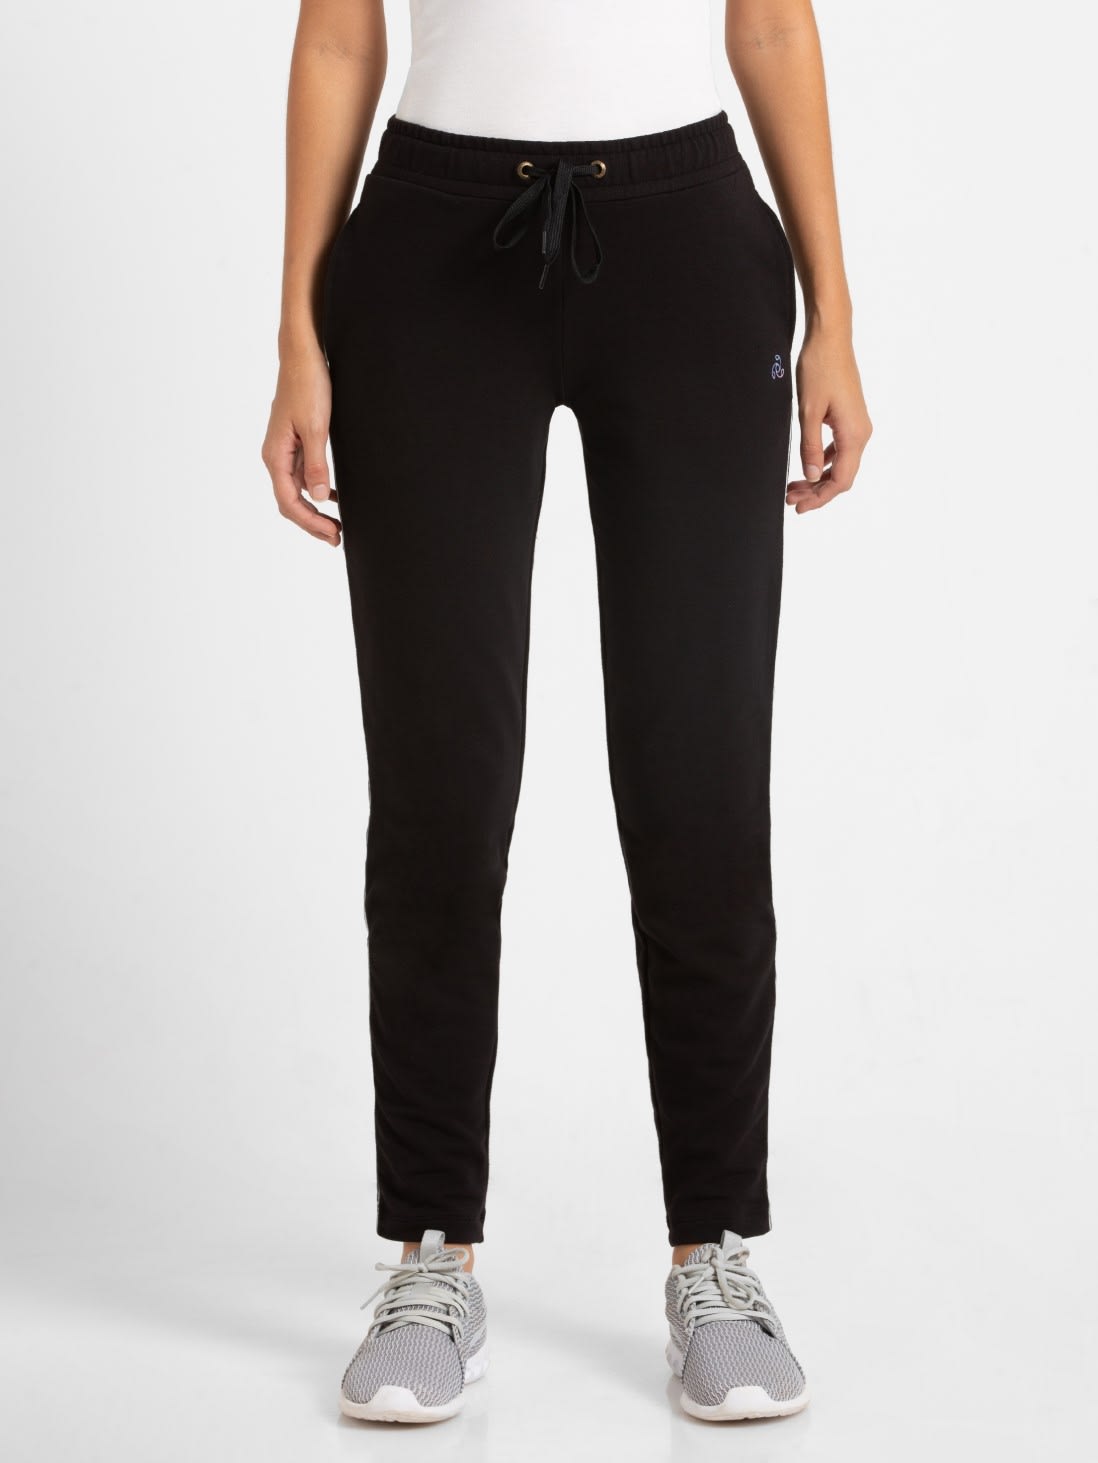 Black Track Pant with Pocket & Drawstring Closure for Women AW60 ...